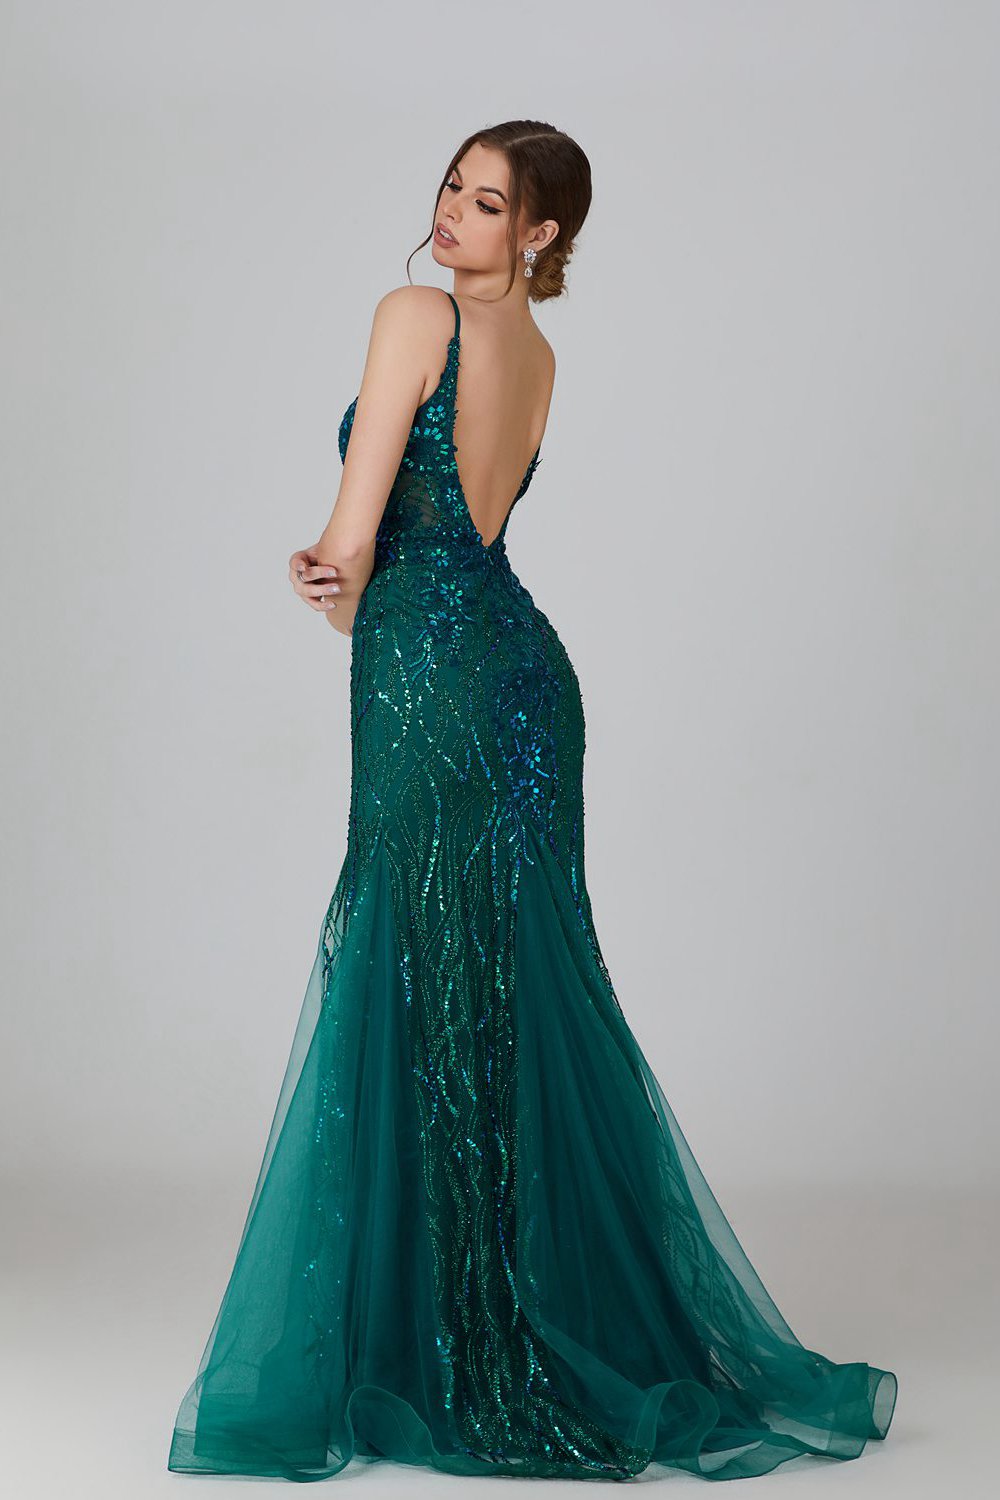 Wholesale Splendor The Captivating Netted Mermaid Prom Gown 3308